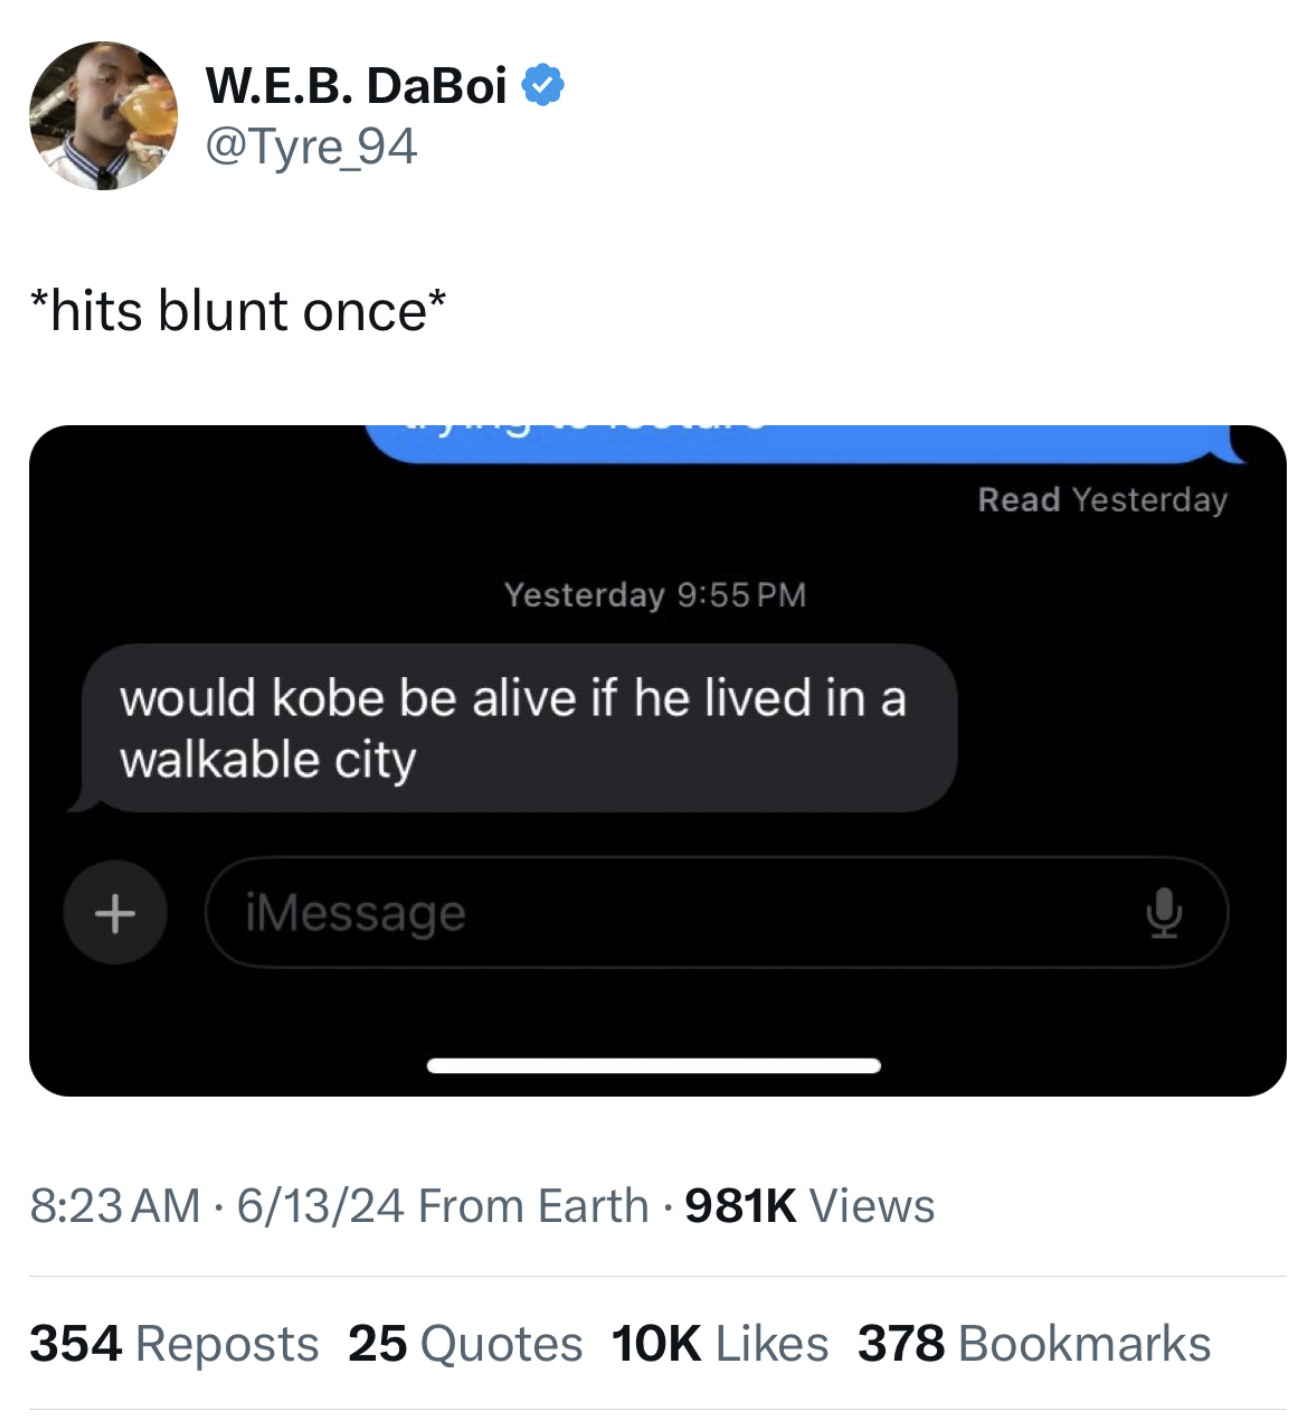 screenshot - W.E.B. DaBoi hits blunt once Yesterday would kobe be alive if he lived in a walkable city iMessage Read Yesterday 61324 From Earth Views 354 Reposts 25 Quotes 10K 378 Bookmarks